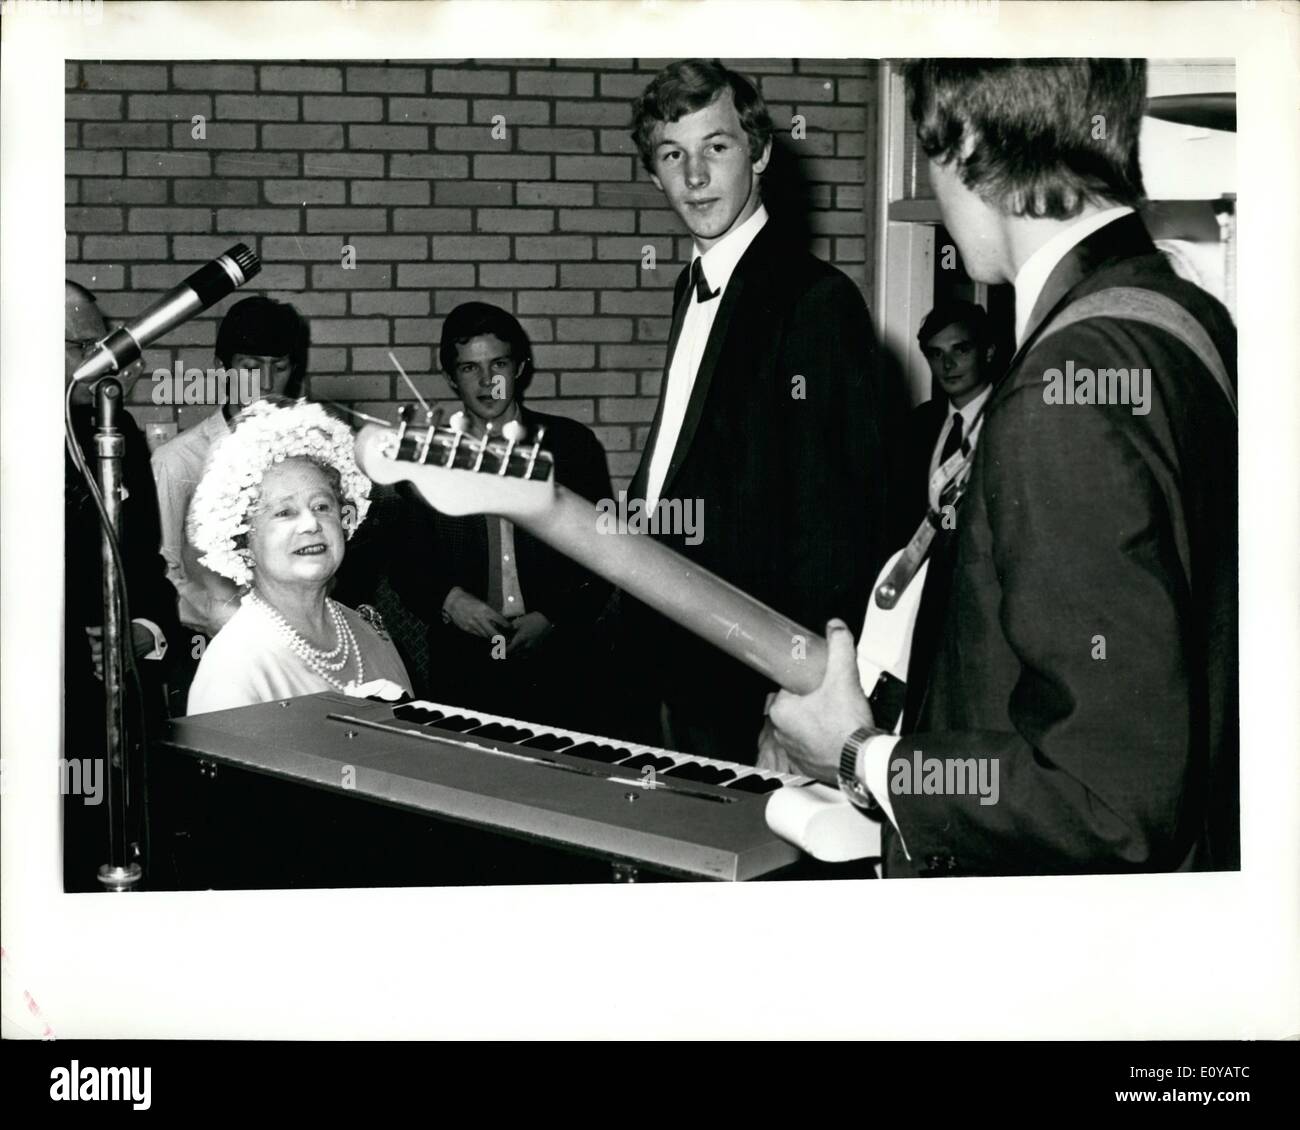 Jul. 07, 1969 - Guitar Serenade For Queen Mother, is seen at the Hitchitn, Hertfordshire, Youth centre today, July 4, being serenaded by Keith Ruff, 18, and his youth band. The Queen Mother made a long tour of the centre taking a great interest in the many activities for young people. Stock Photo